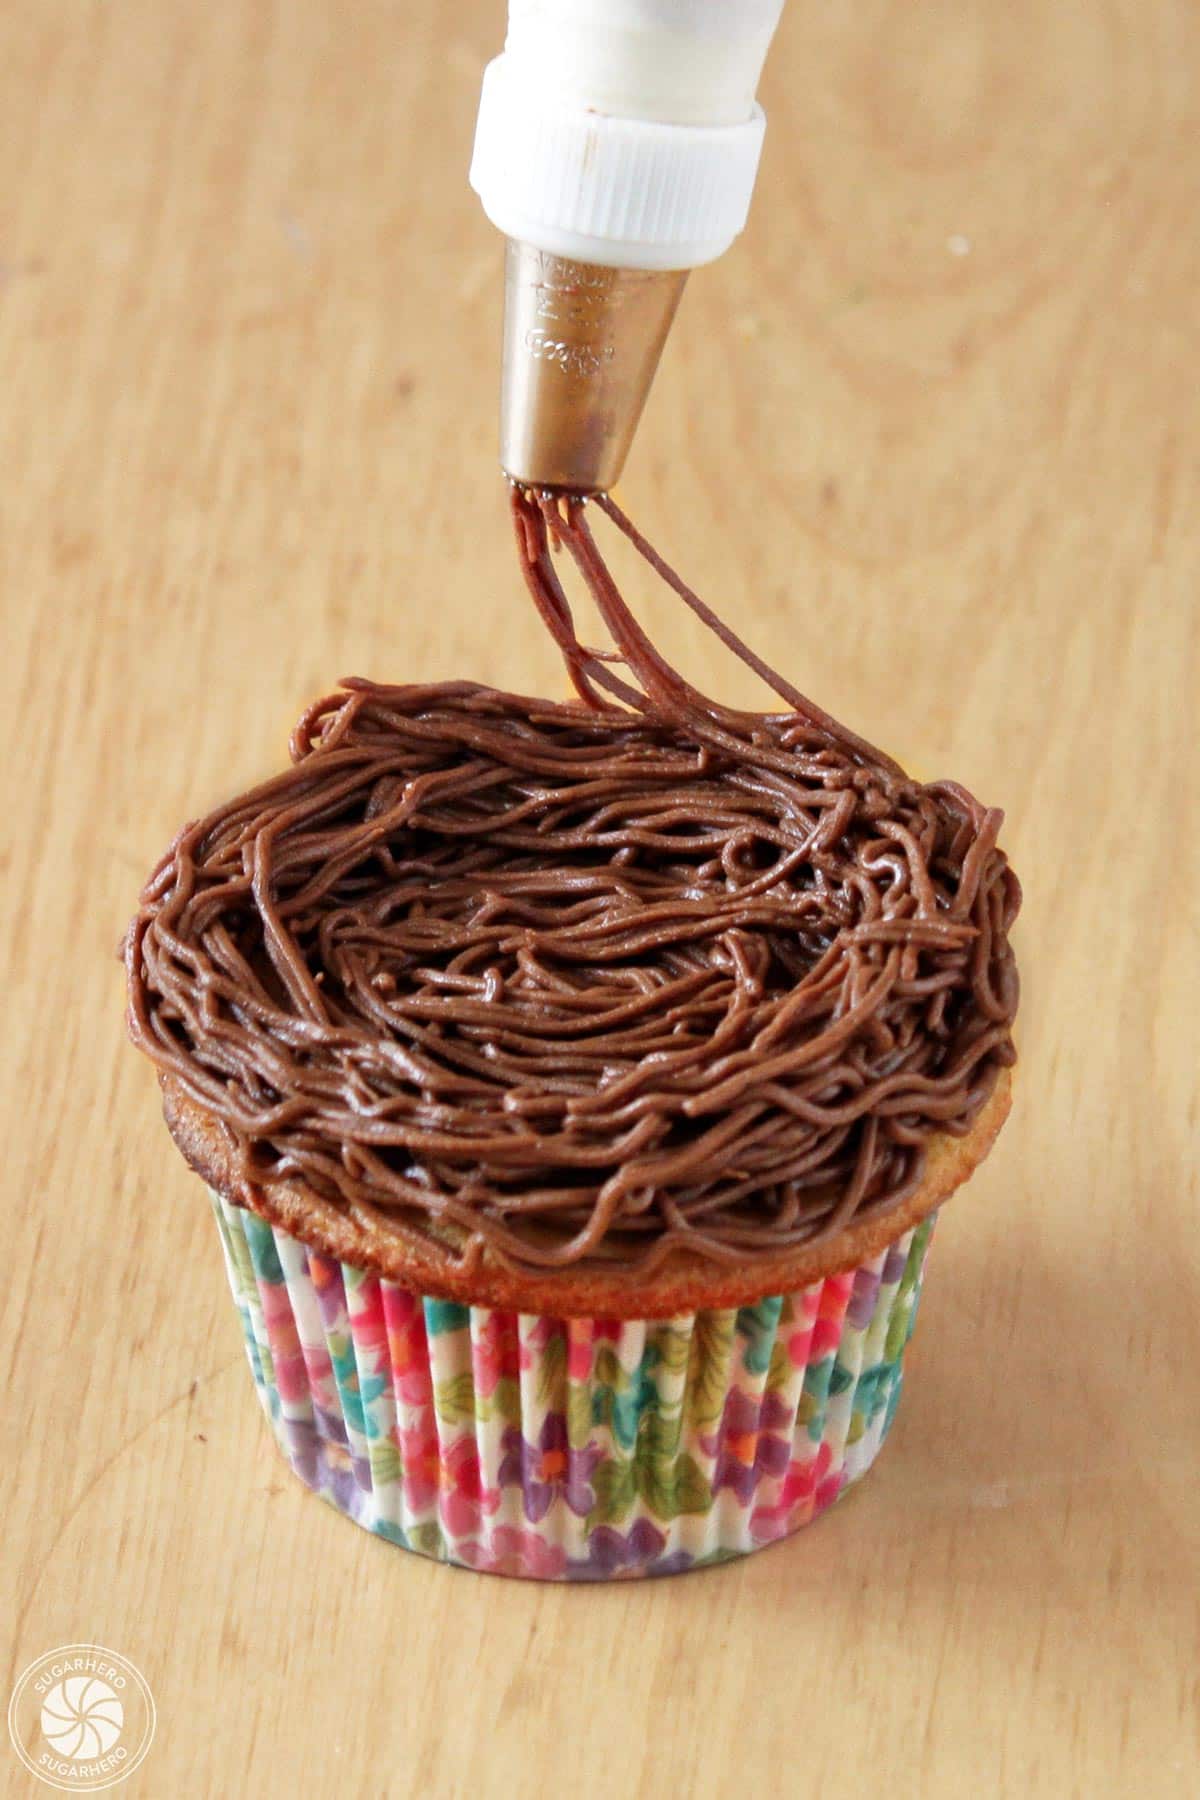 Piping a chocolate buttercream nest around the outside edge of a cupcake.